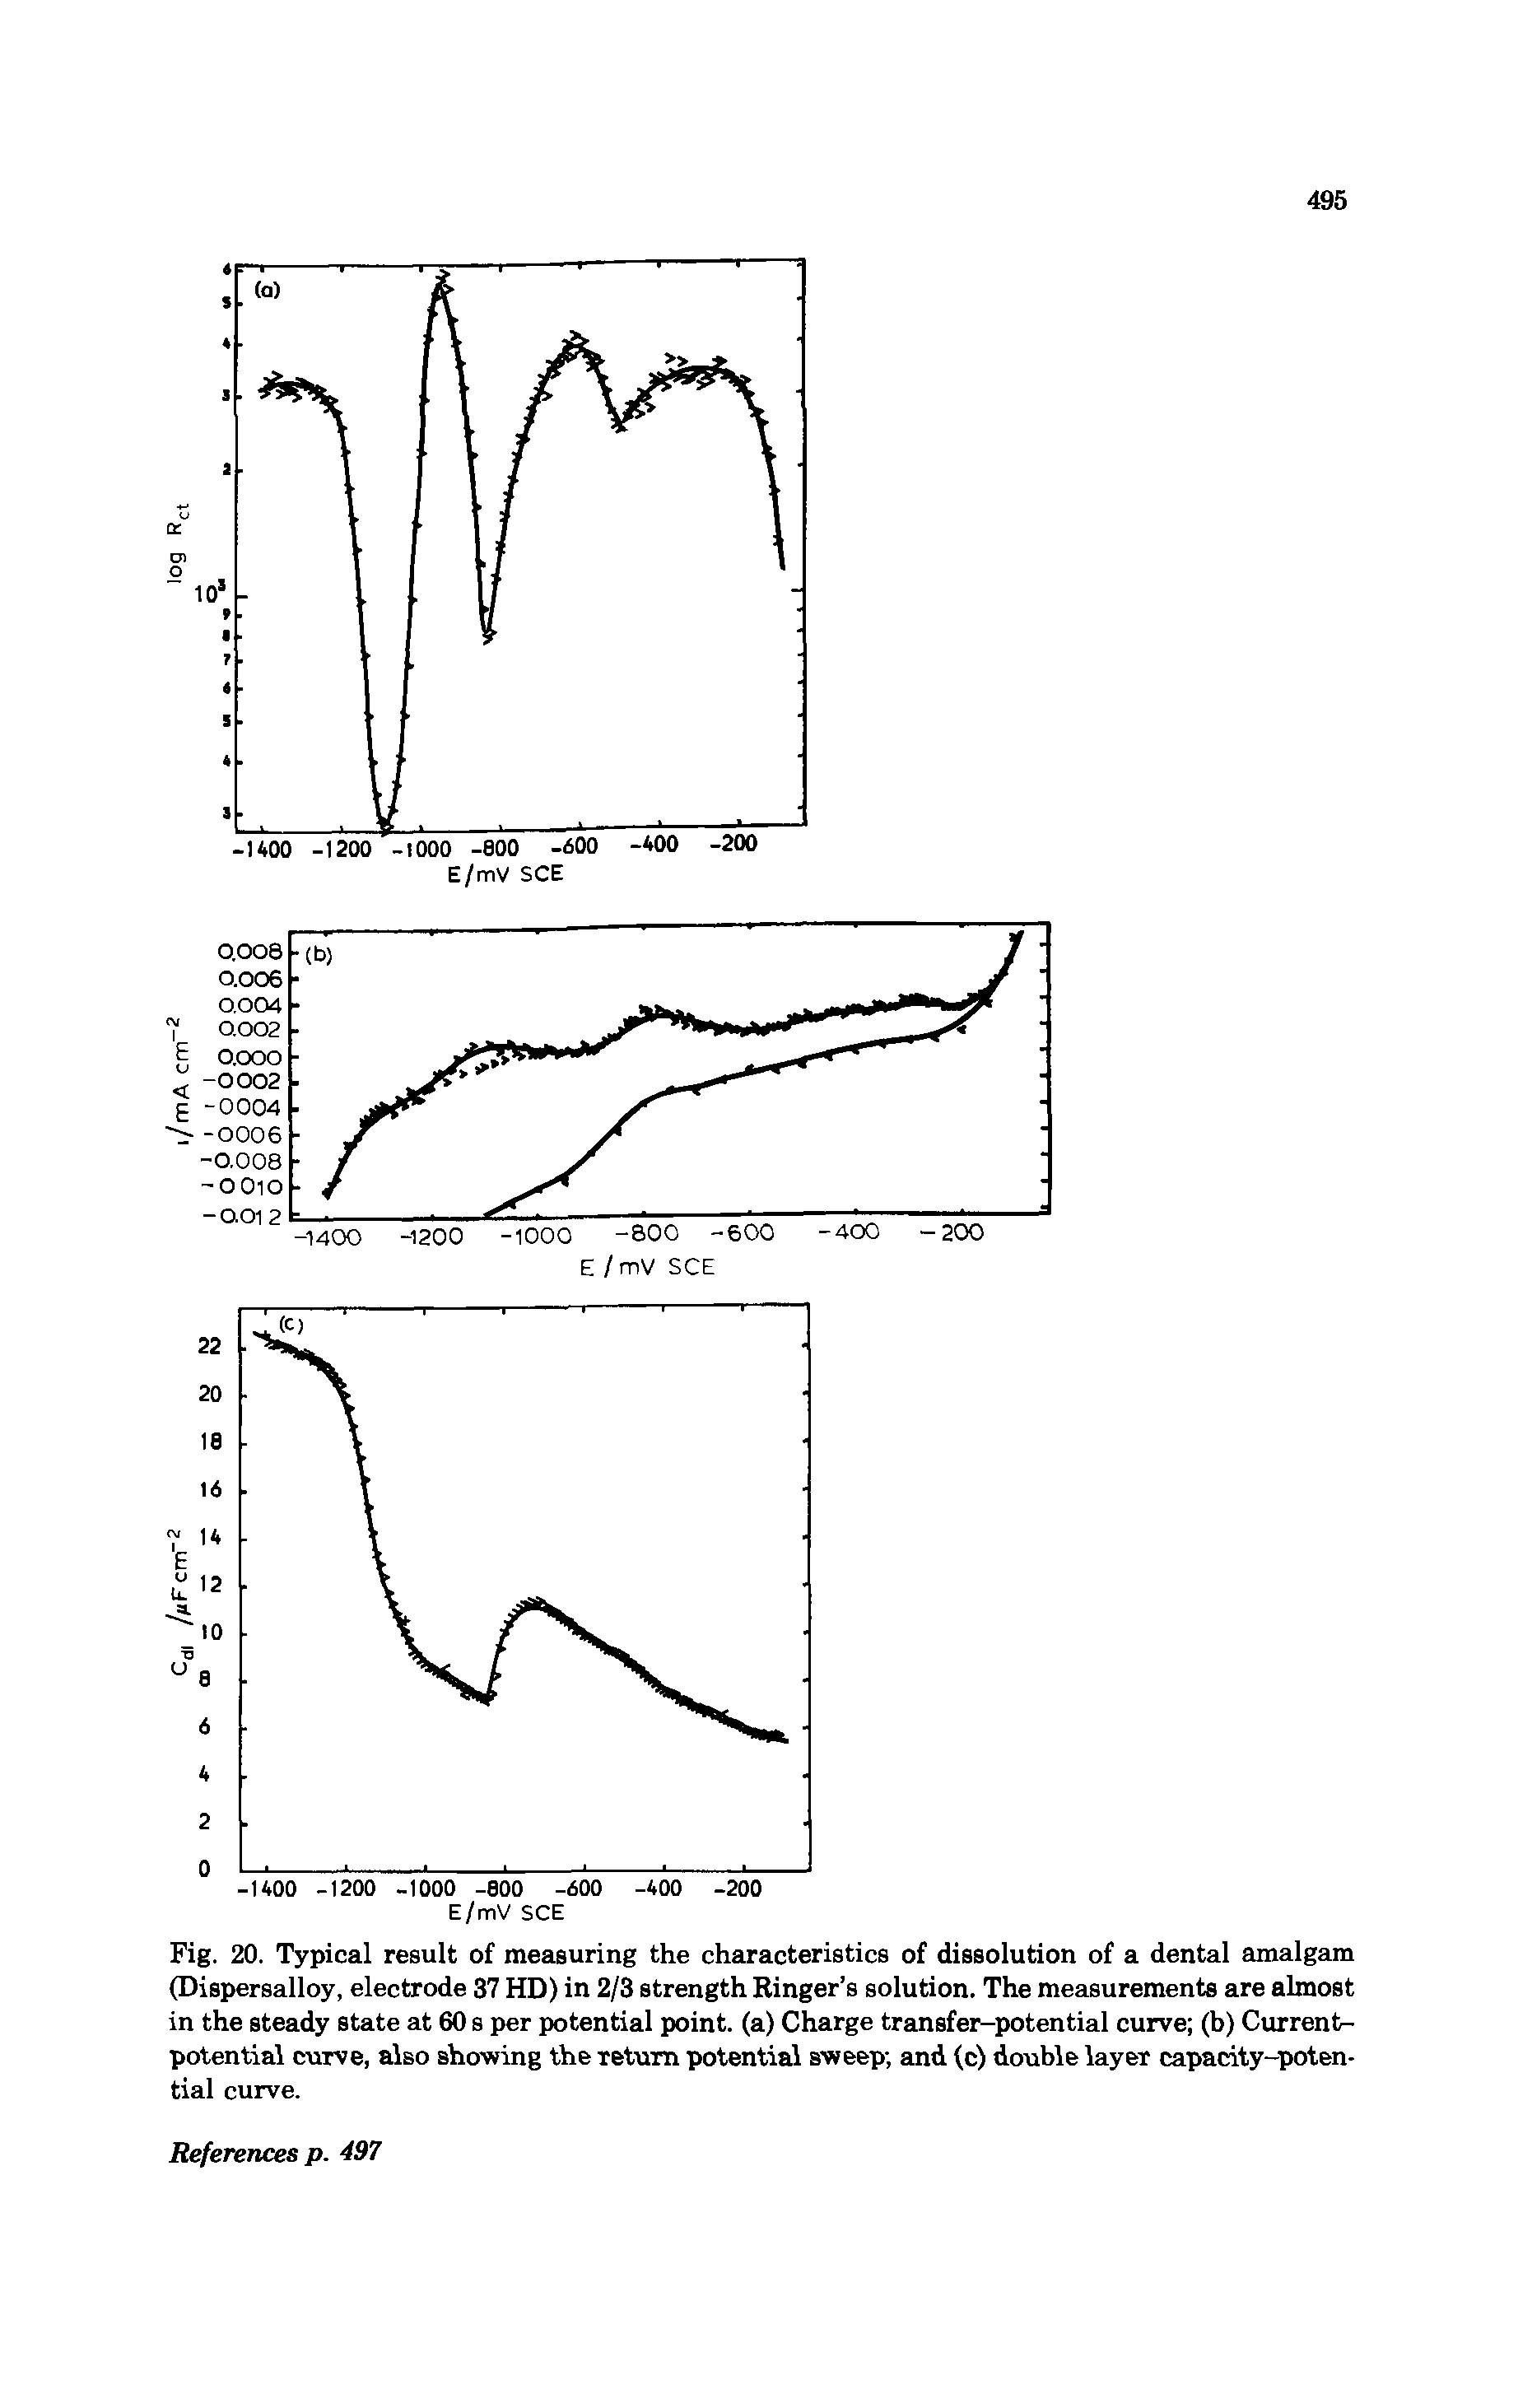 Fig. 20. Typical result of measuring the characteristics of dissolution of a dental amalgam (Dispersalloy, electrode 37 HD) in 2/3 strength Ringer s solution. The measurements are almost in the steady state at 60 s per potential point, (a) Charge transfer-potential curve (b) Current-potential curve, also showing the return potential sweep and (c) double layer capacity-potential curve.